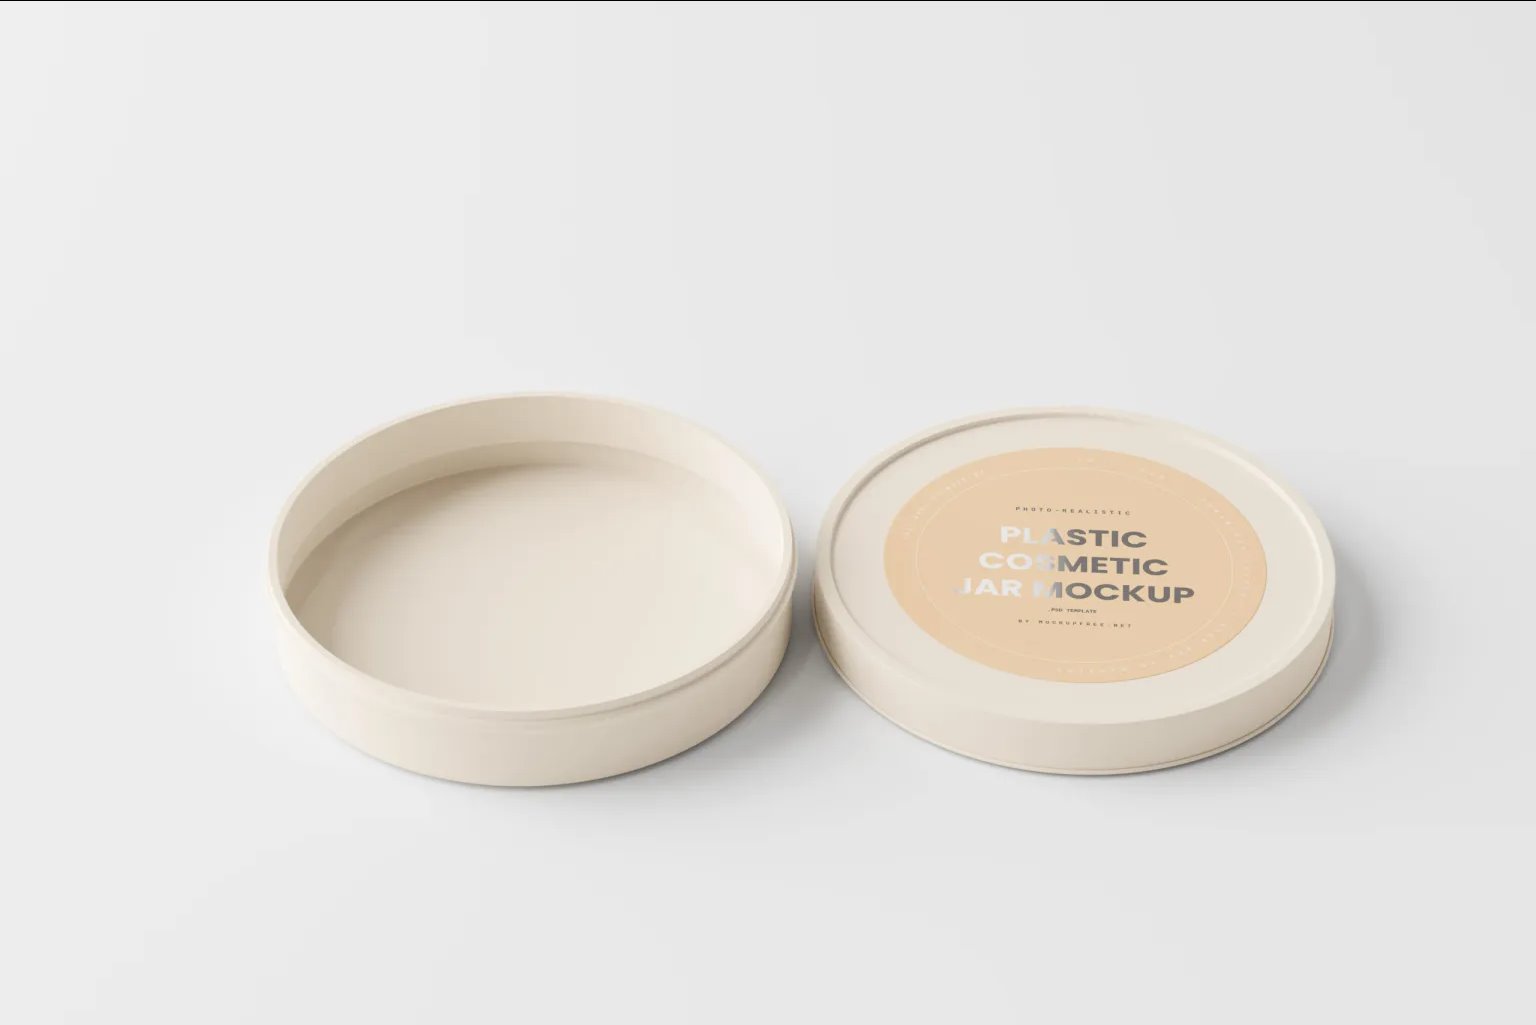 10 Mockups of Flat Plastic Cosmetic Jar with Label FREE PSD